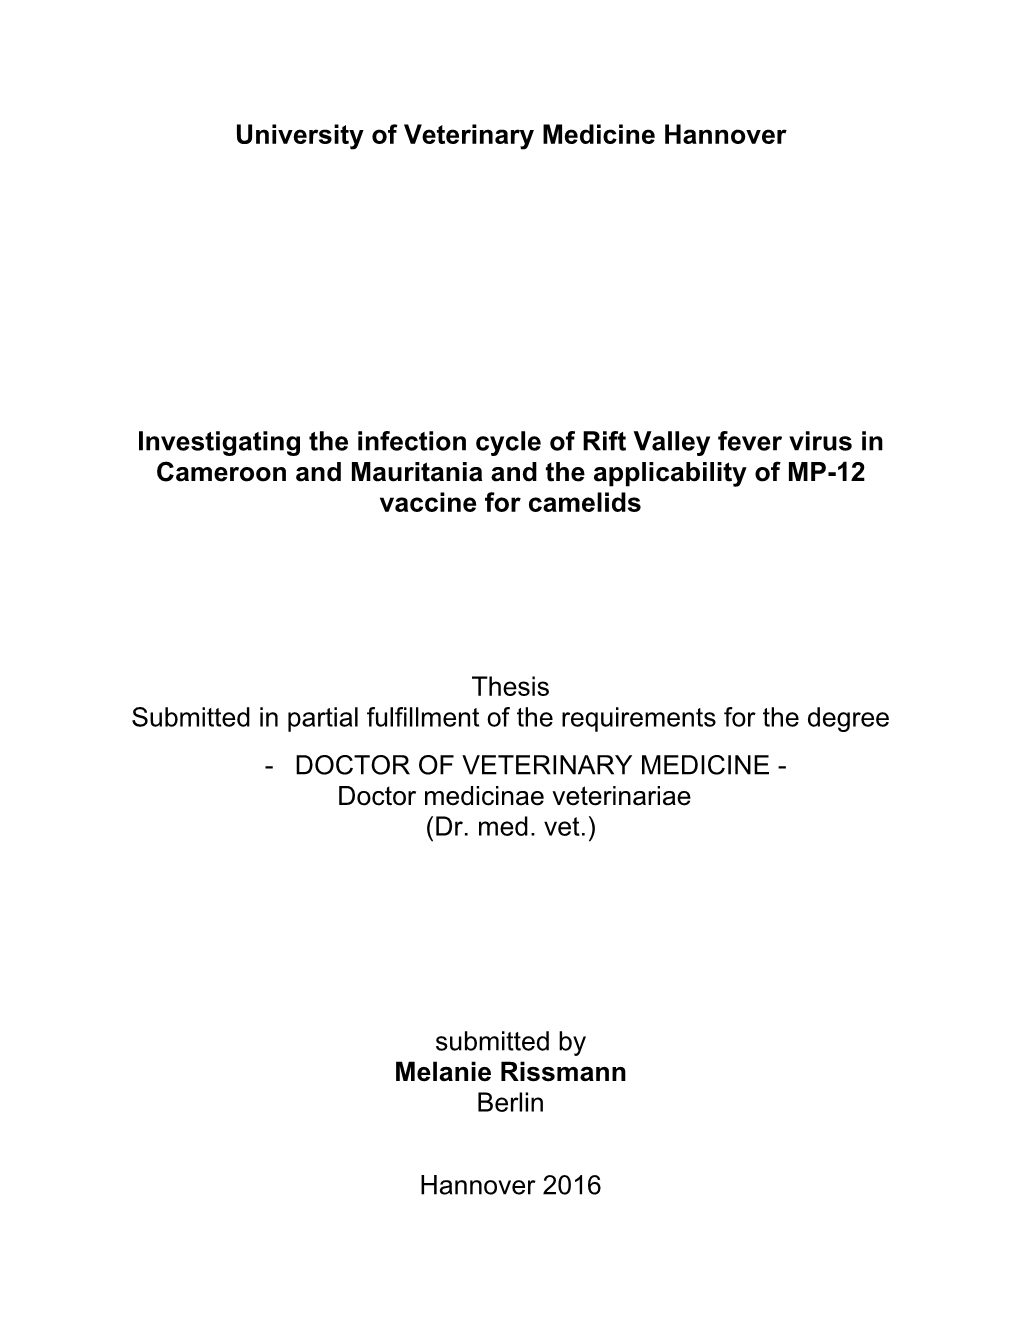 Investigating the Infection Cycle of Rift Valley Fever Virus in Cameroon and Mauritania and the Applicability of MP-12 Vaccine for Camelids